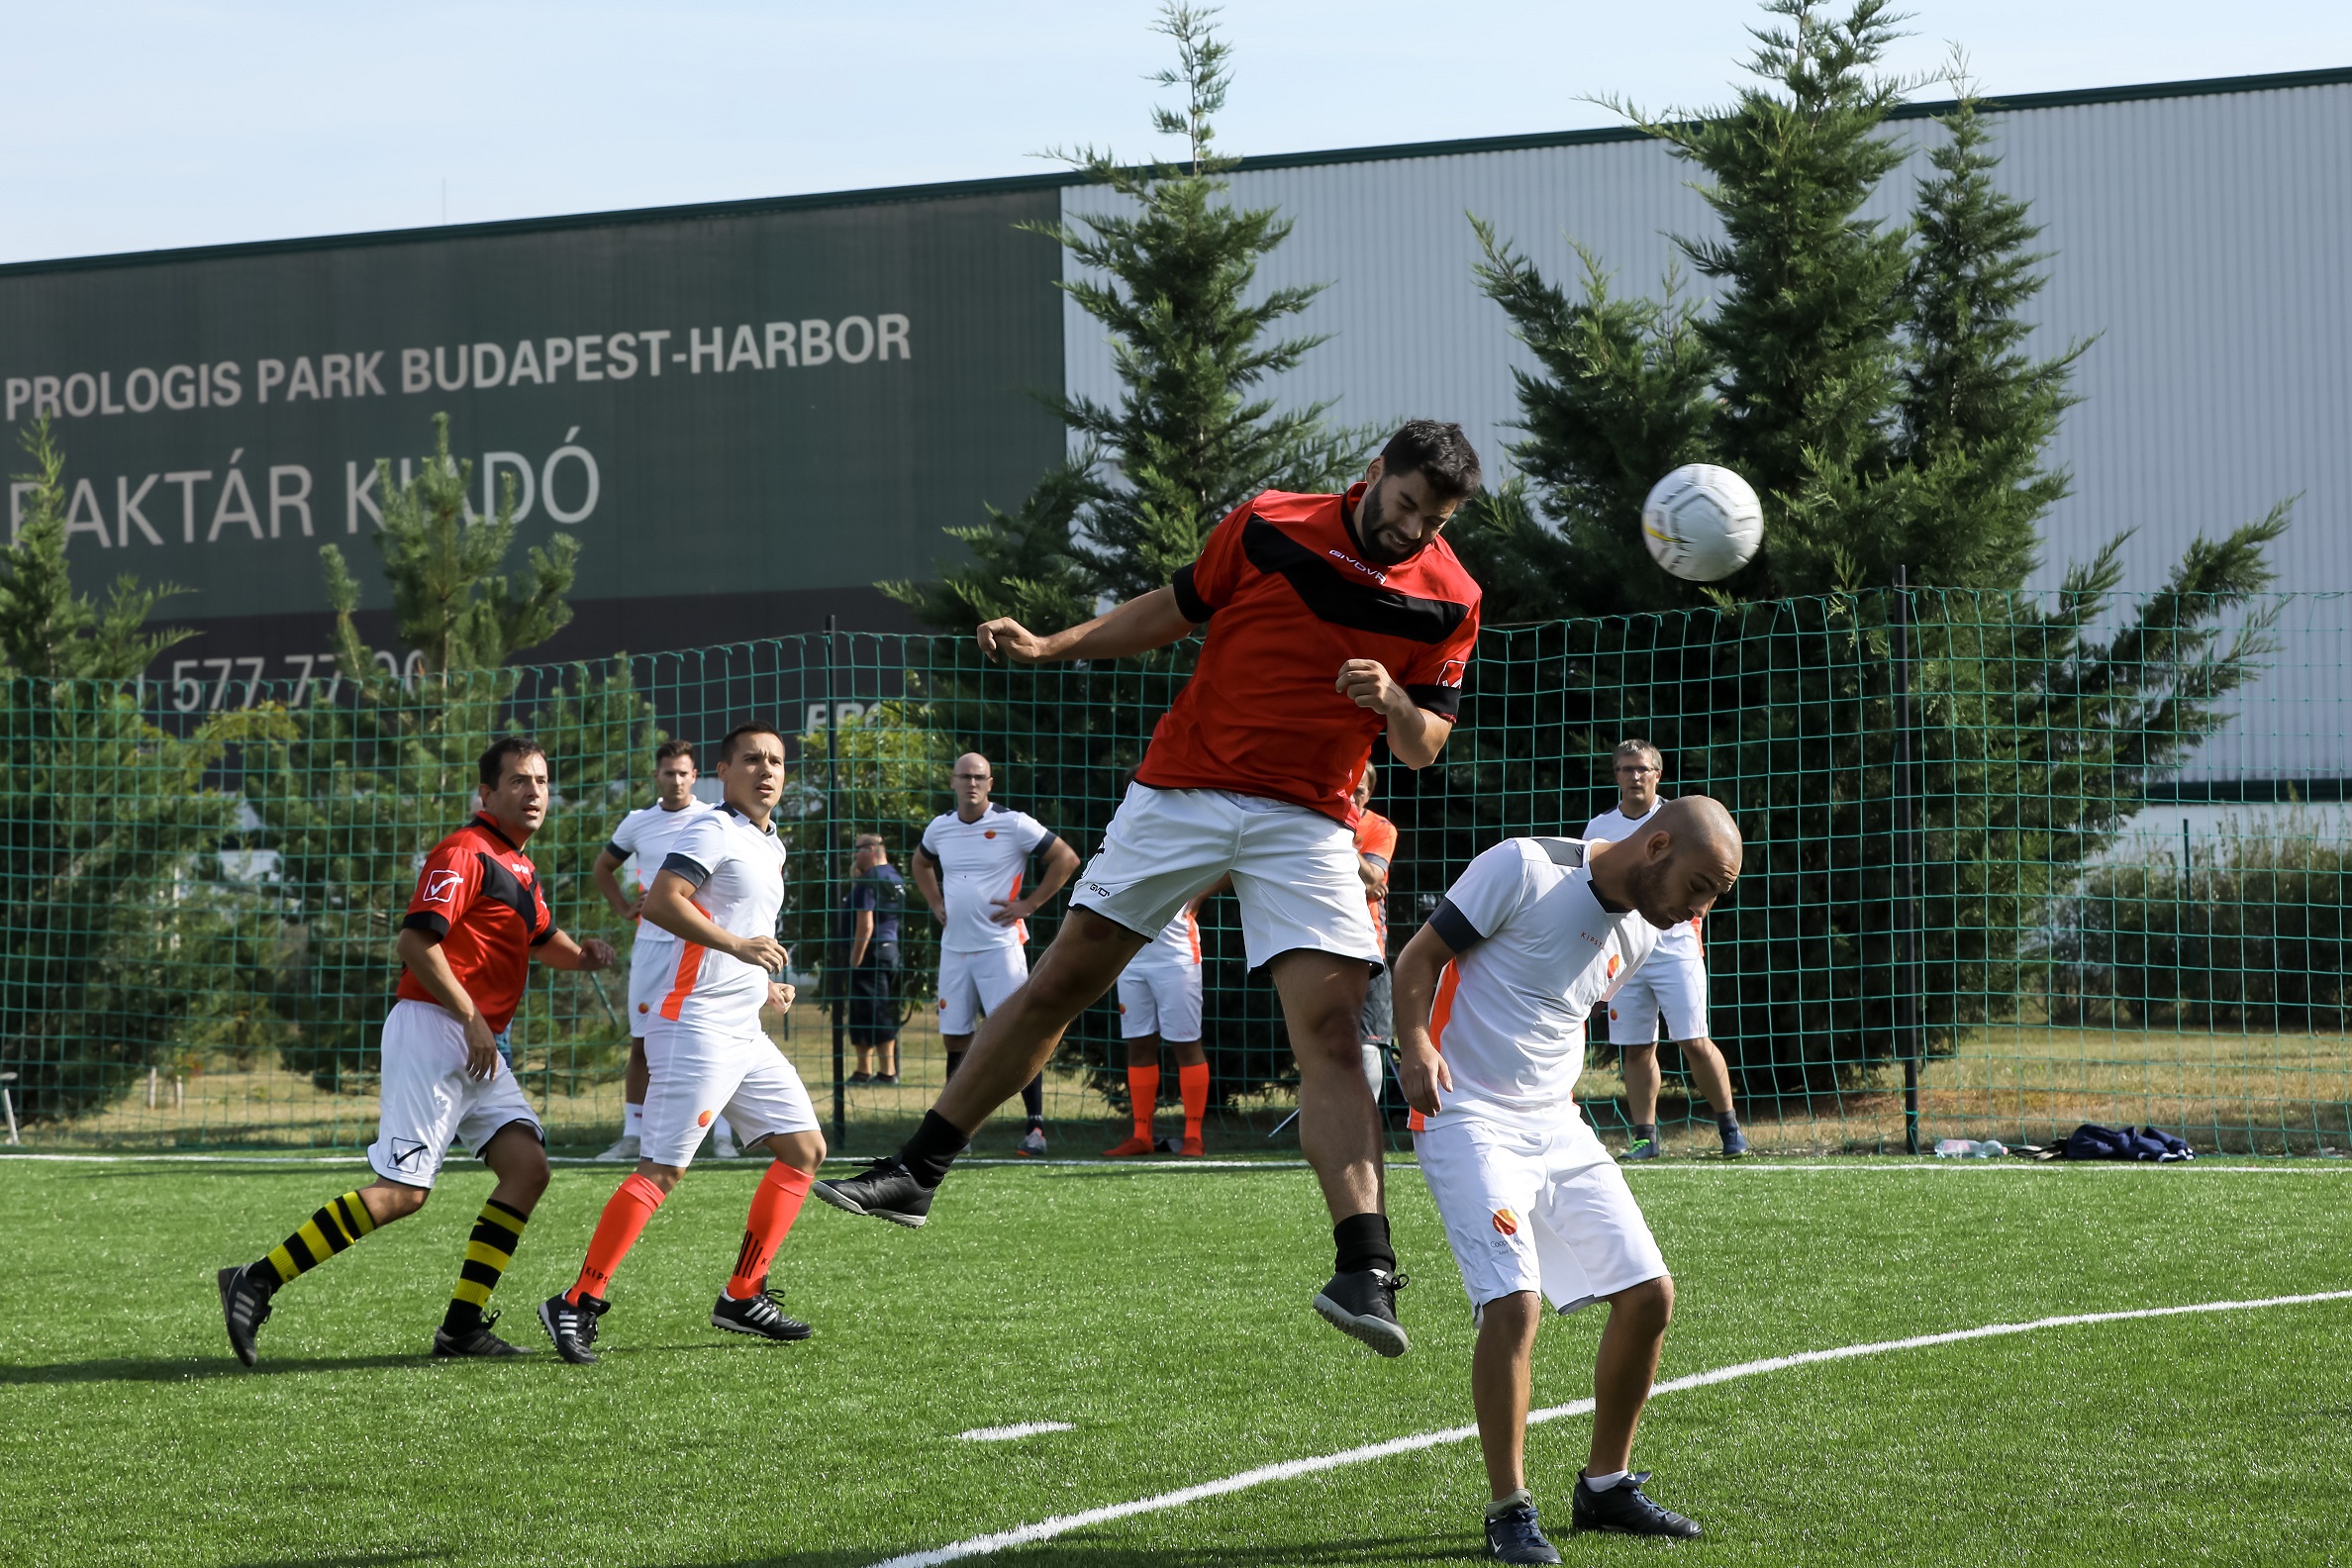 6th Prologis Budapest Football Games